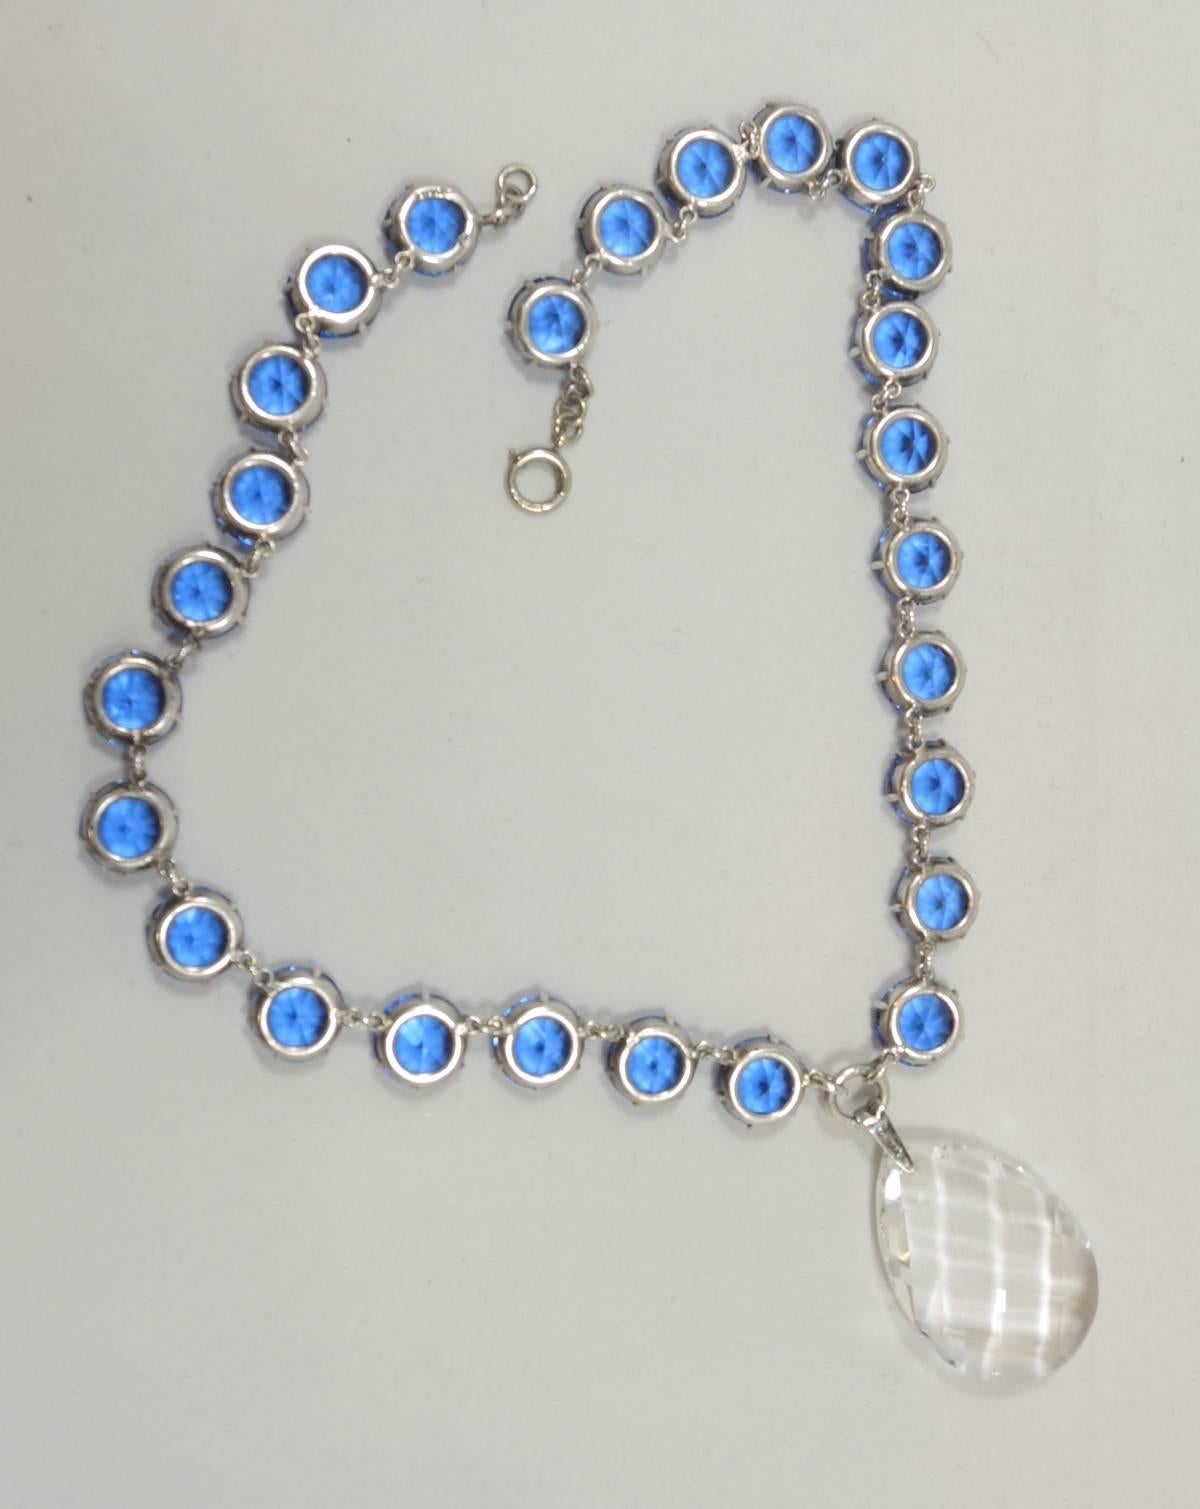 I have never seen this necklace before.  It is different and yet has a classic design.  This necklace has 26 blue faceted and prong set open back crystals. There is a large clear and faceted teardrop crystal at the drop. It has a spring ring clasp